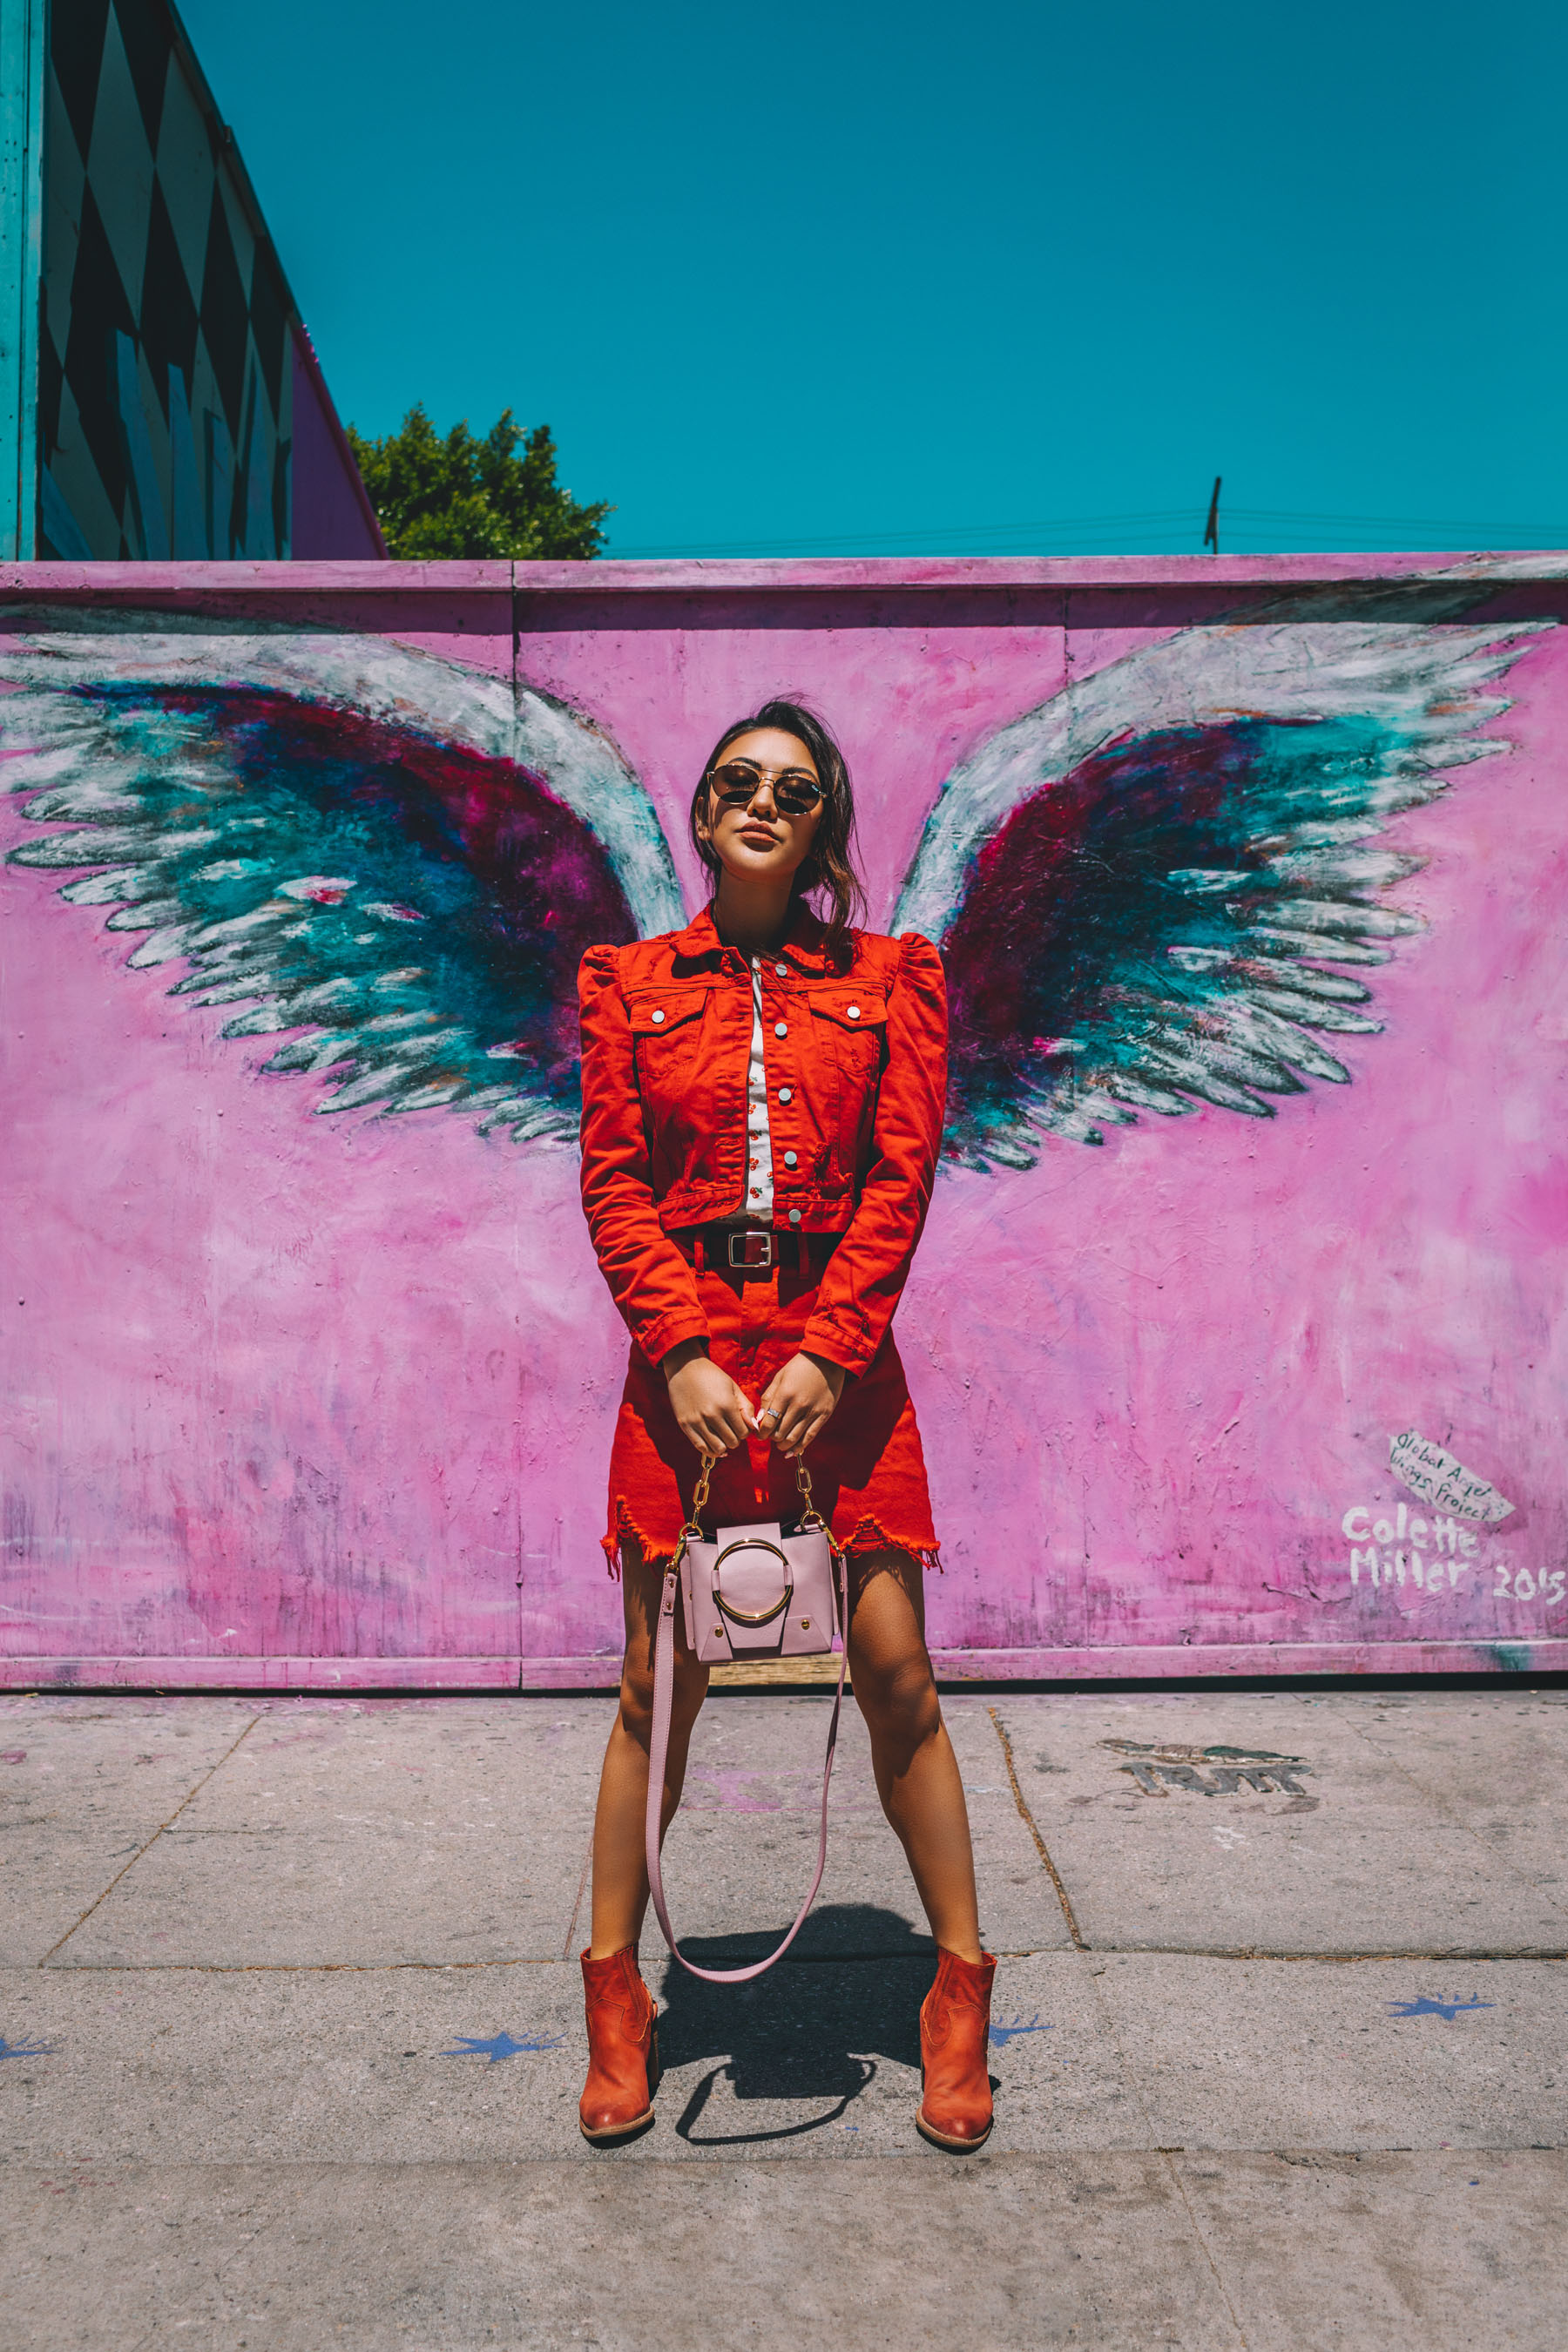 Bold Festival Style - Coachella Outfits Round Up, Red denim oufit, Los Angeles Graffiti Wing Wall // Notjessfashion.com